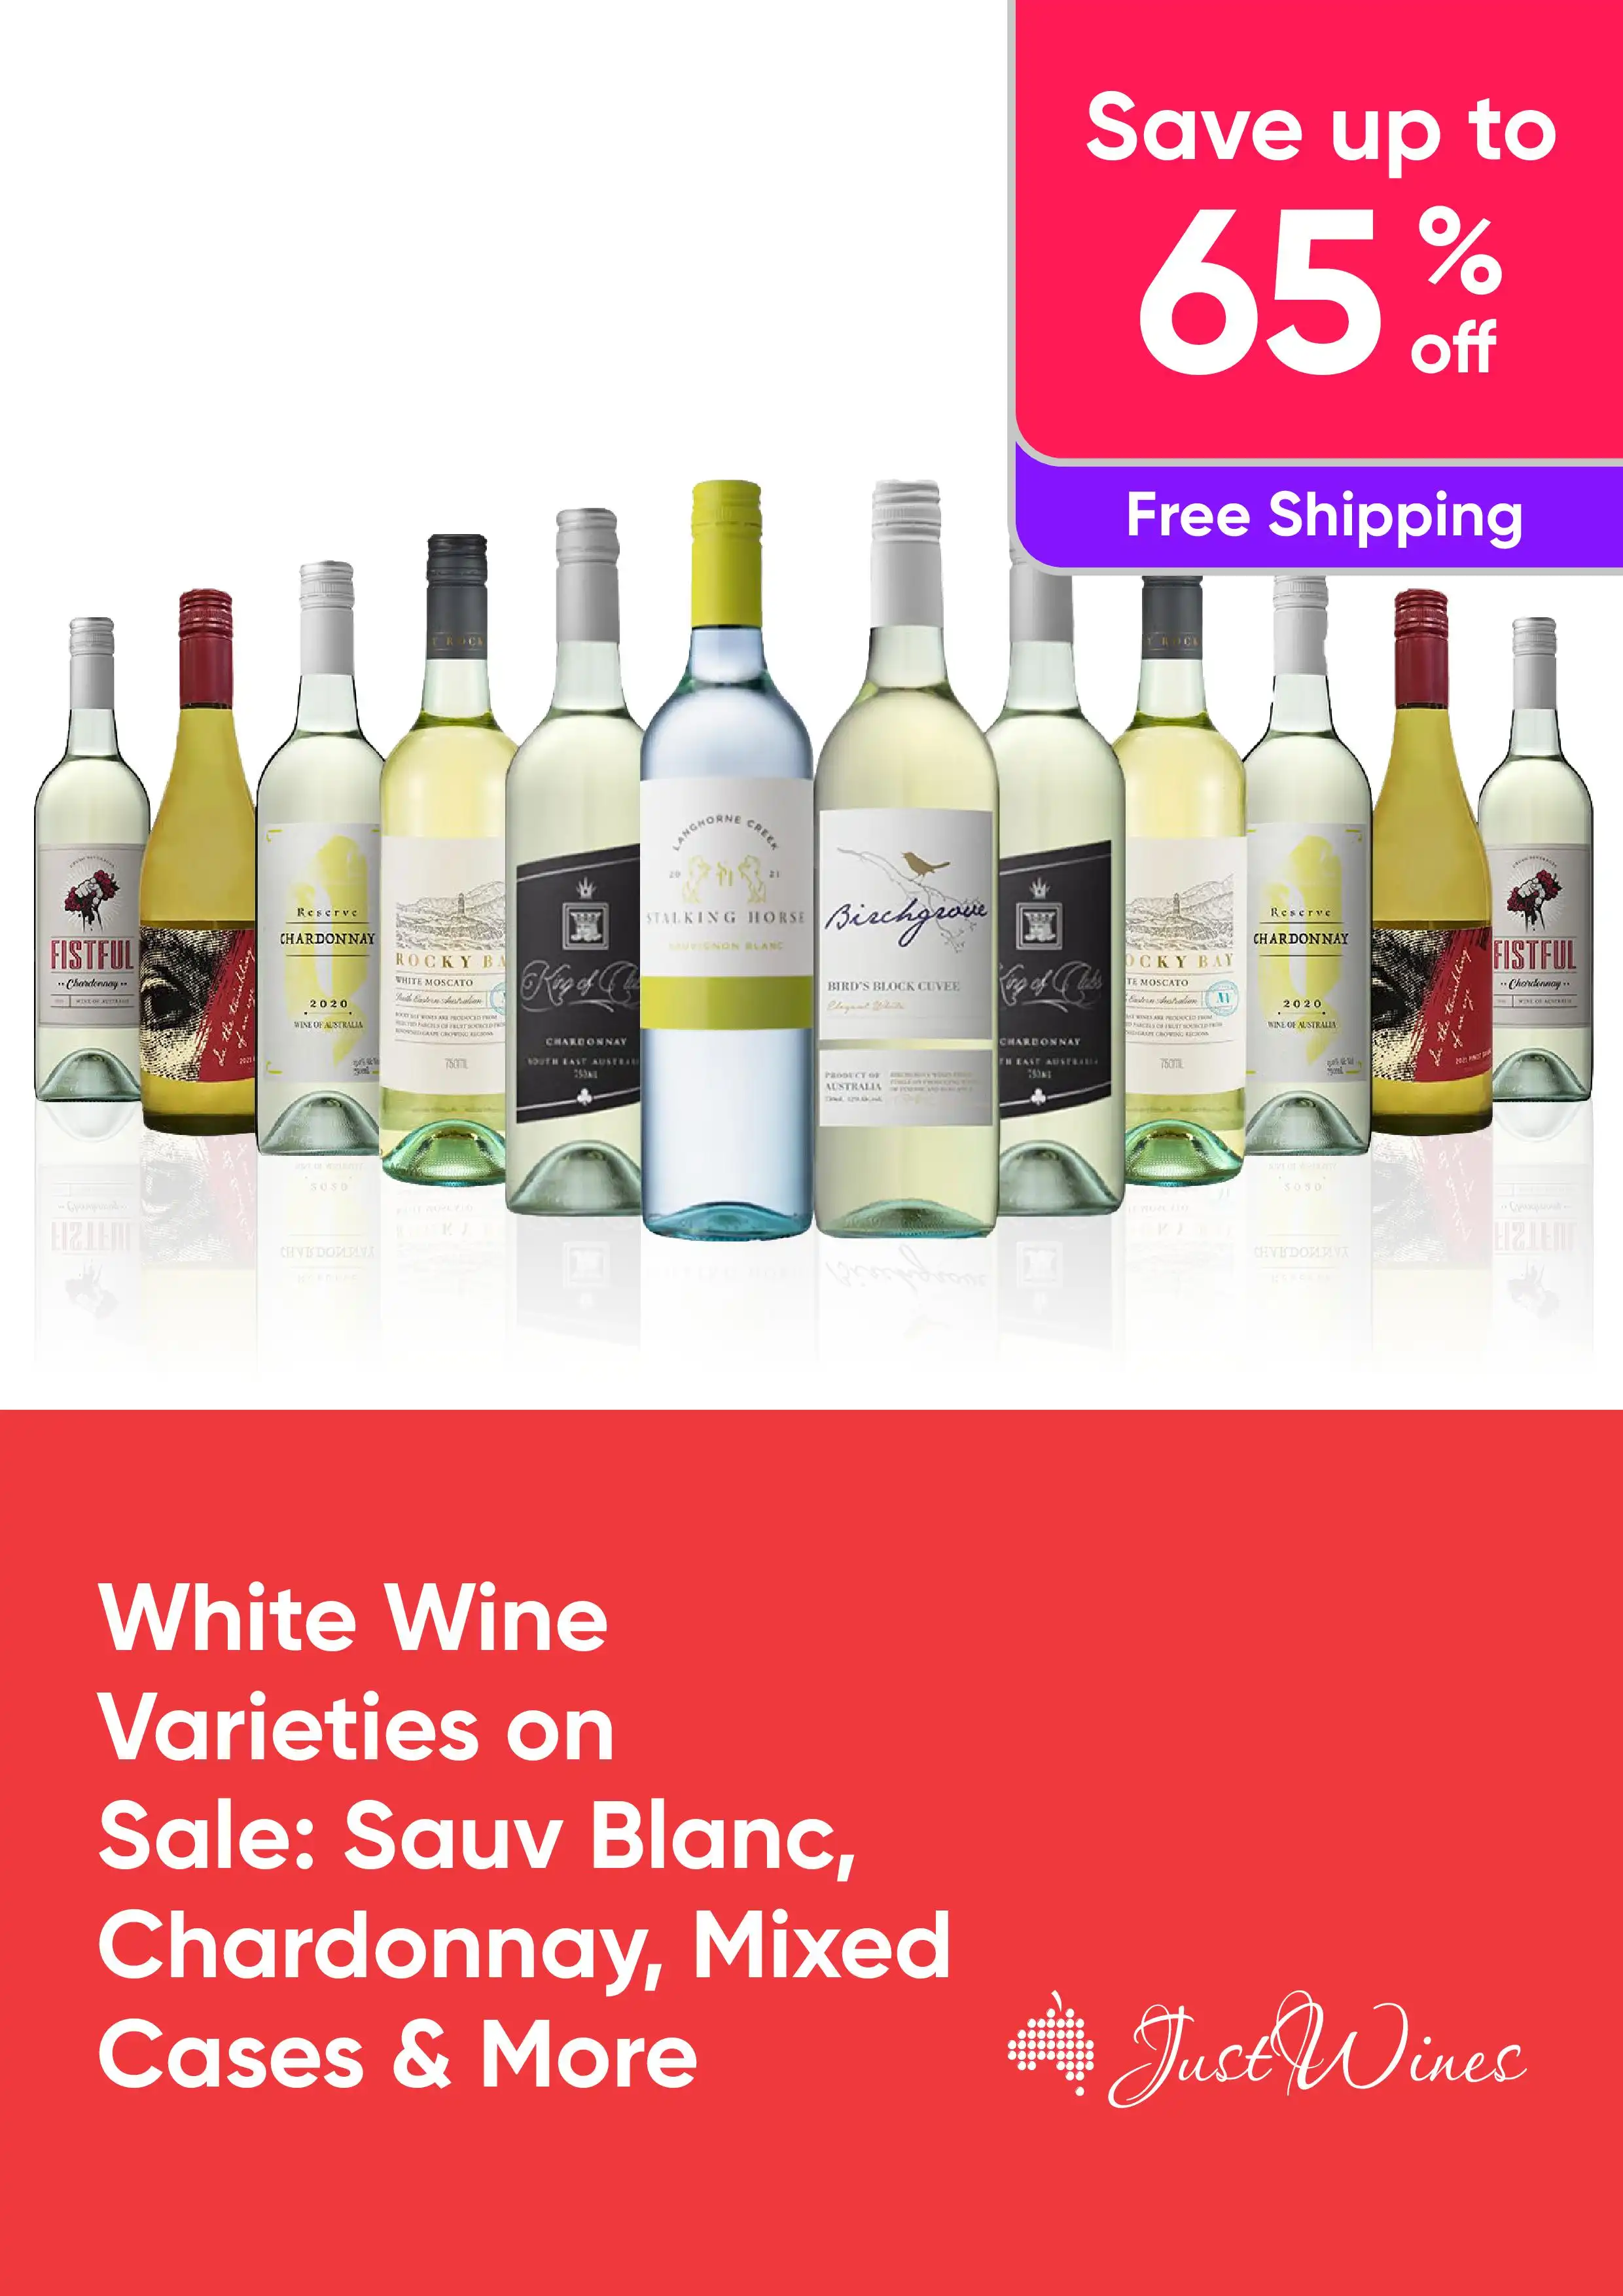 White Wine Varieties on Sale: Sauv Blanc, Chardonnay, Mixed Cases & More - Save up to 65% Off